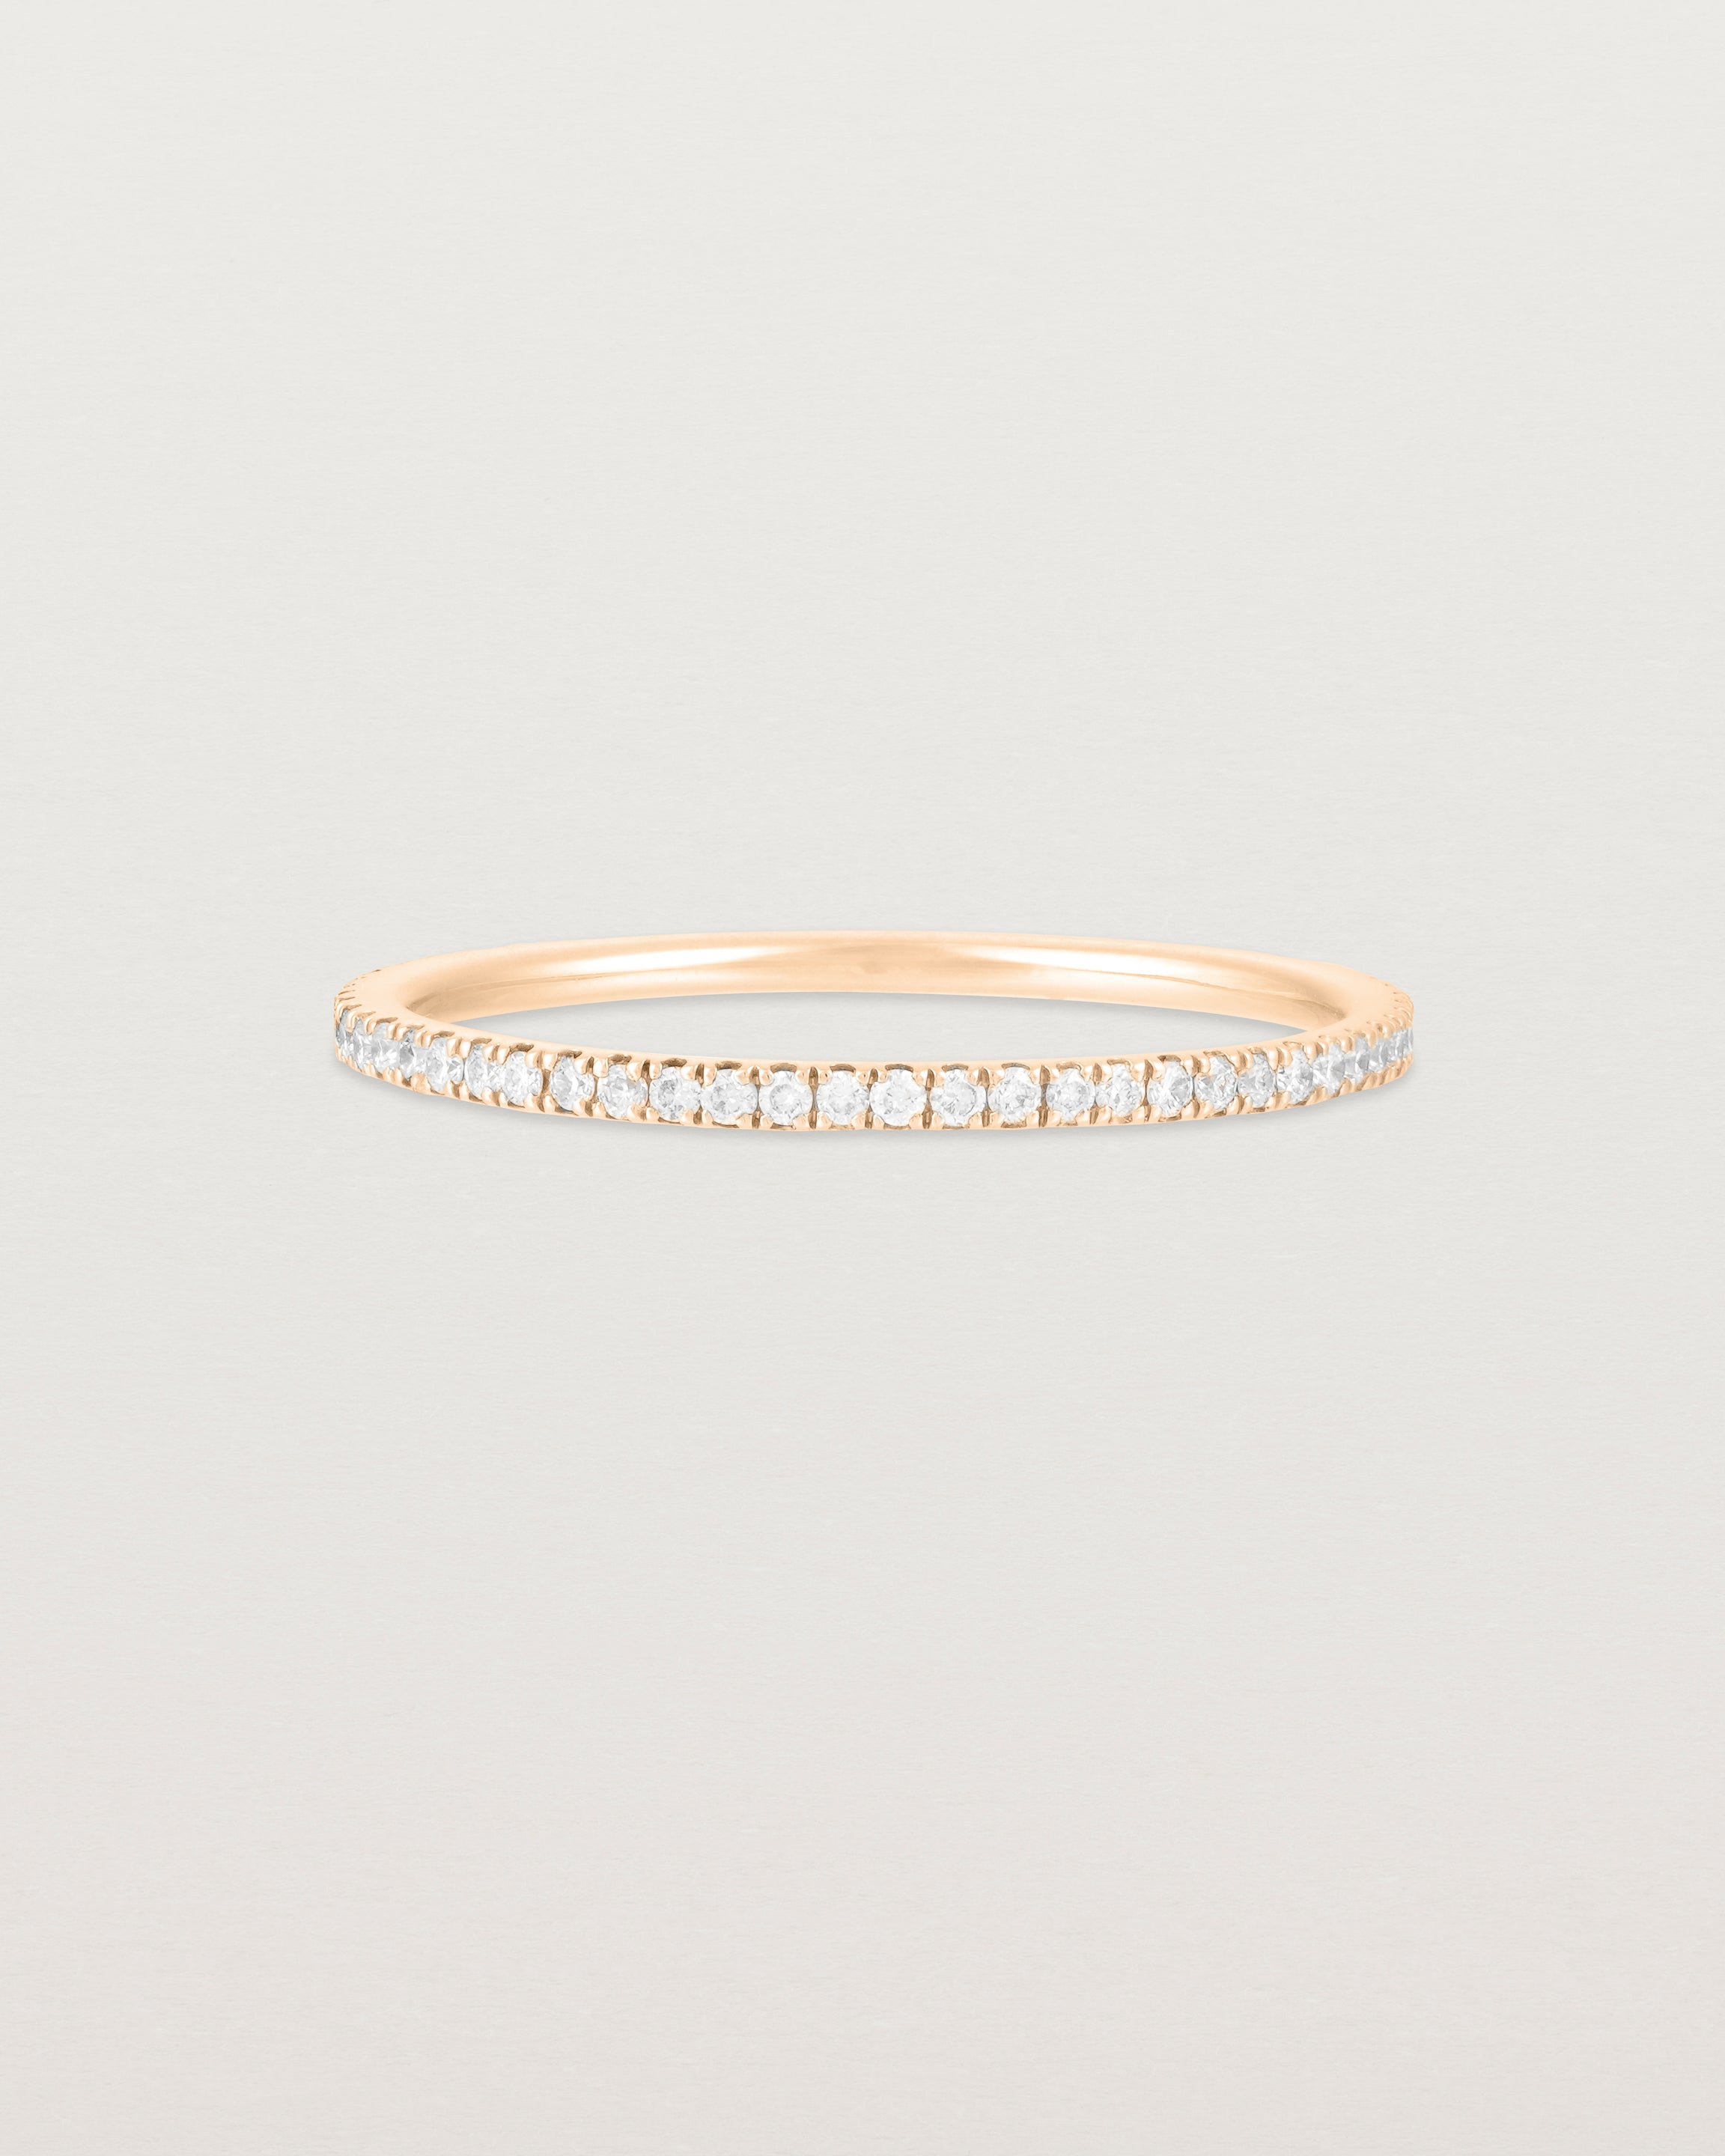 A full rose gold band featuring white diamonds